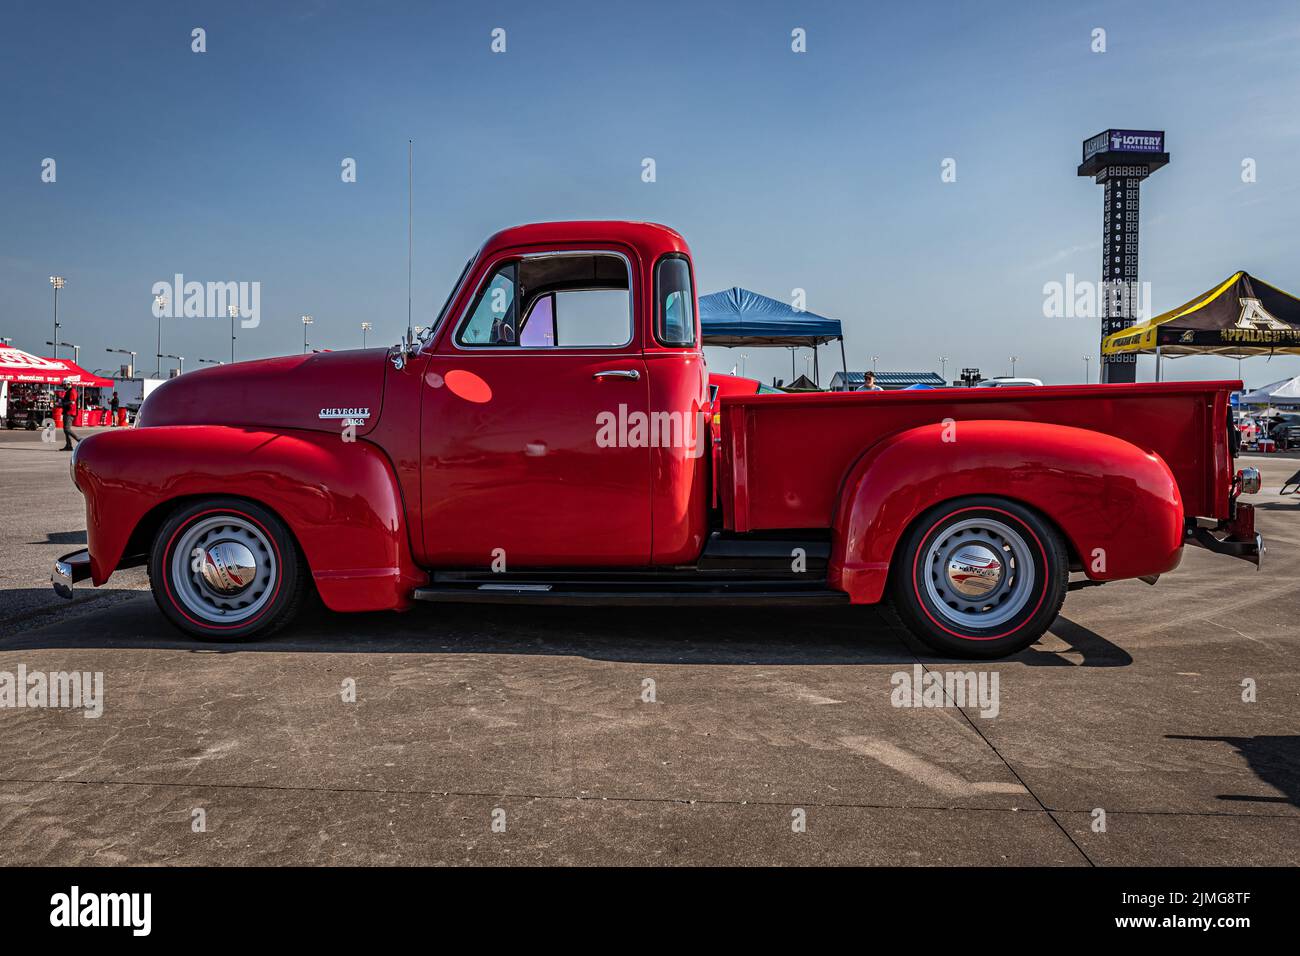 Lebanon, TN - May 13, 2022: Wide angle low perspective side view of a 1952 Chevrolet 3100 Pickup Truck at a local car show. Stock Photo